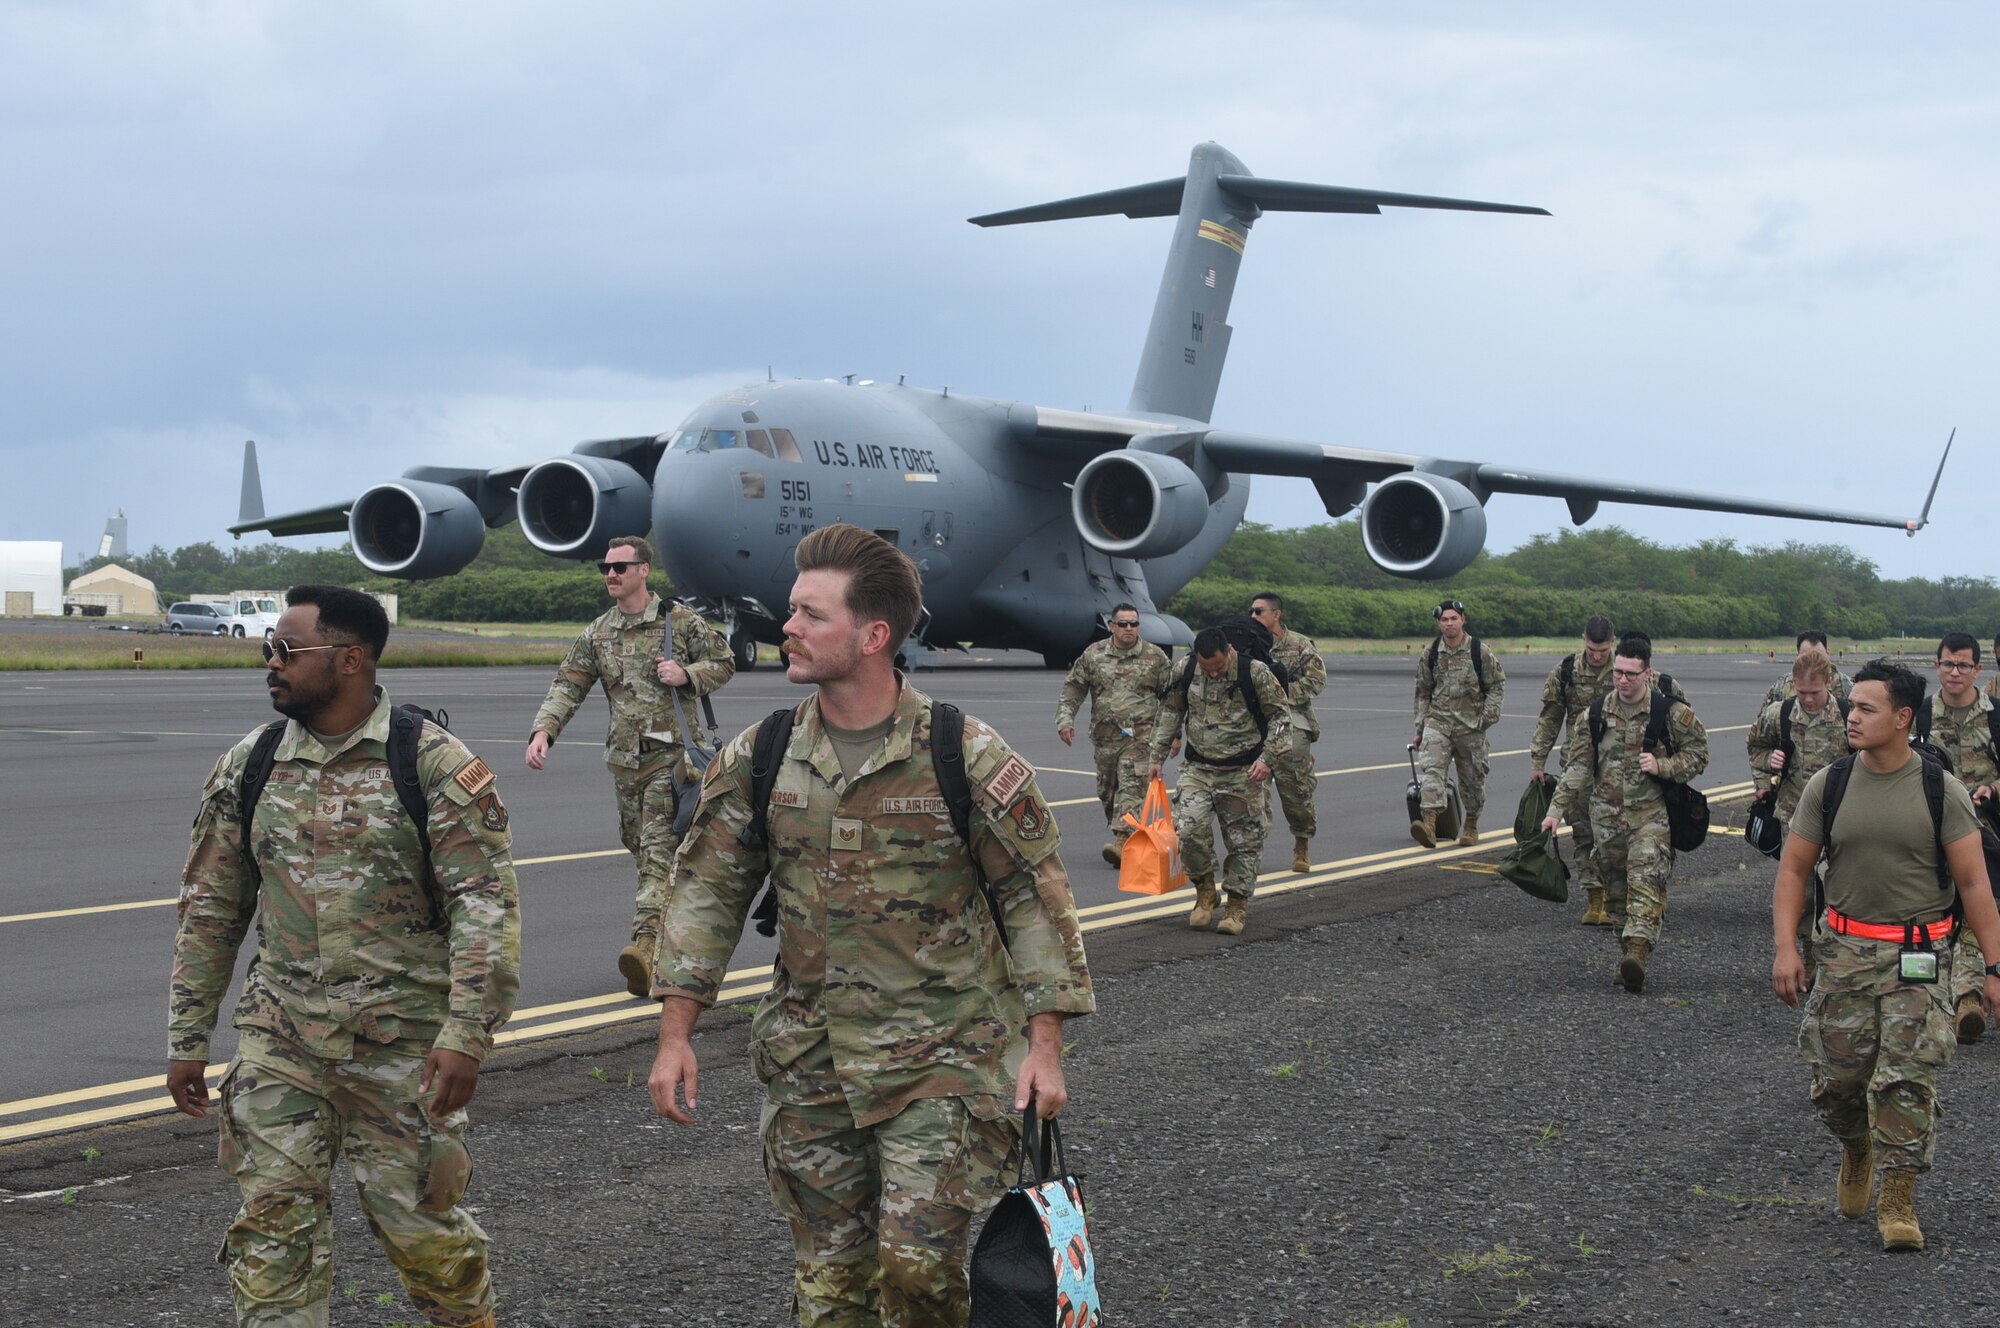 Total Force Airmen from the 154th and 15th Aircraft Maintenance Groups arrive at the Pacific Missile Range Facility at Barking Sands, Hawaii, March 7, 2023. Aircraft armament systems crews flew to Kauai on a C-17 Globemaster III to help receive, rearm and launch fighter aircraft within a condensed time window.